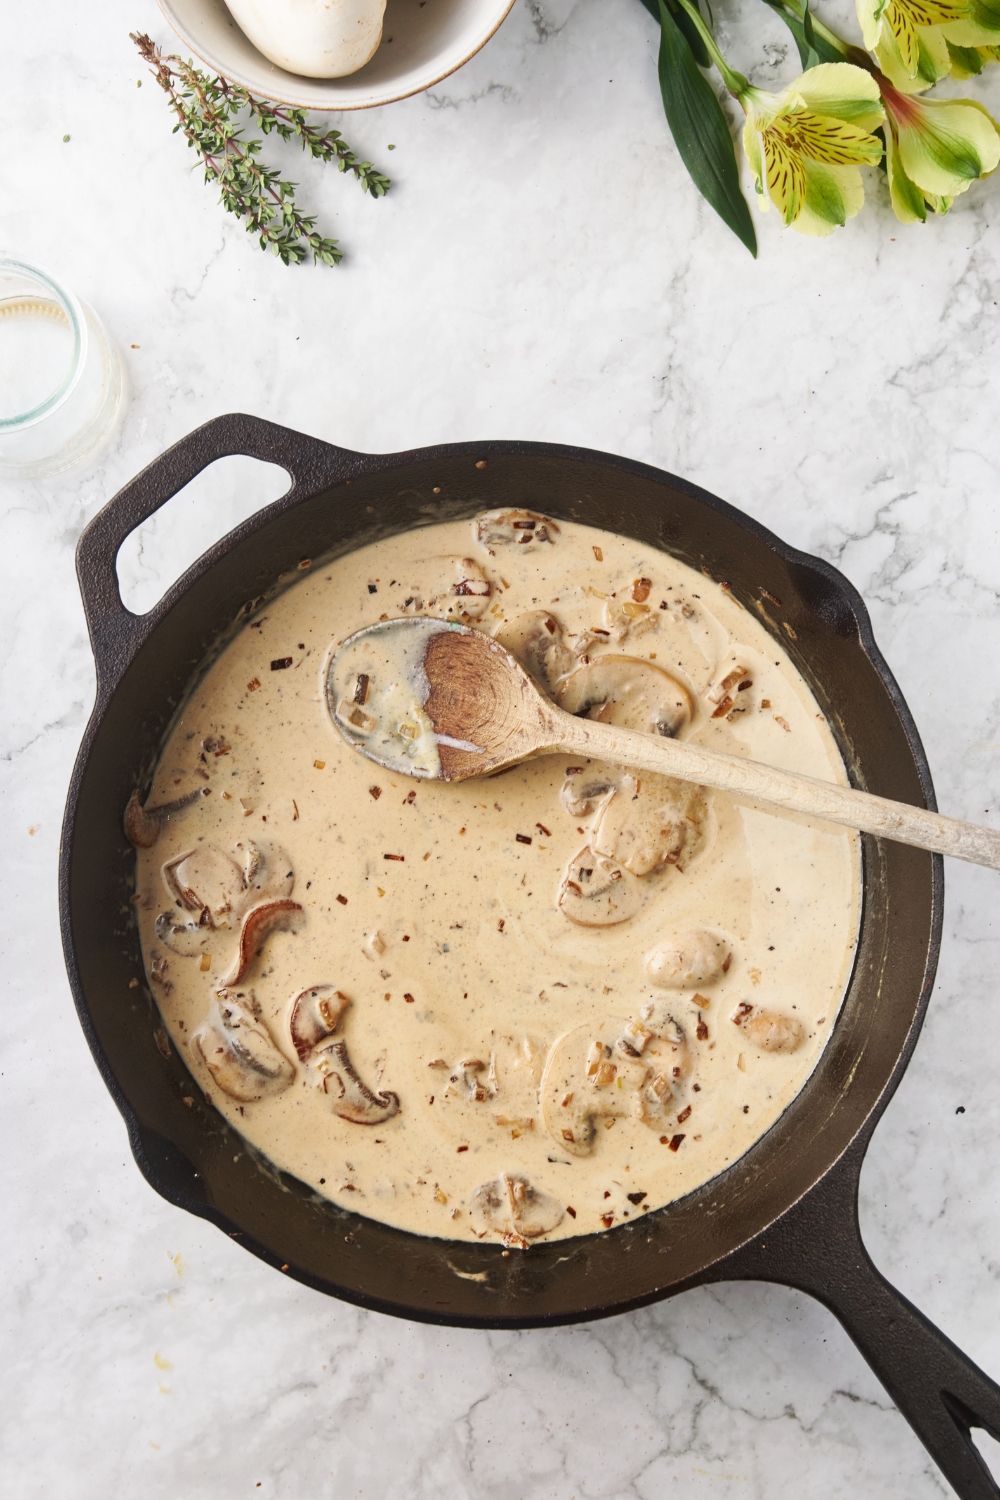 A cast iron skillet with a creamy brown sauce and mushrooms in it. There is a wooden spoon in the skillet covered in the sauce.